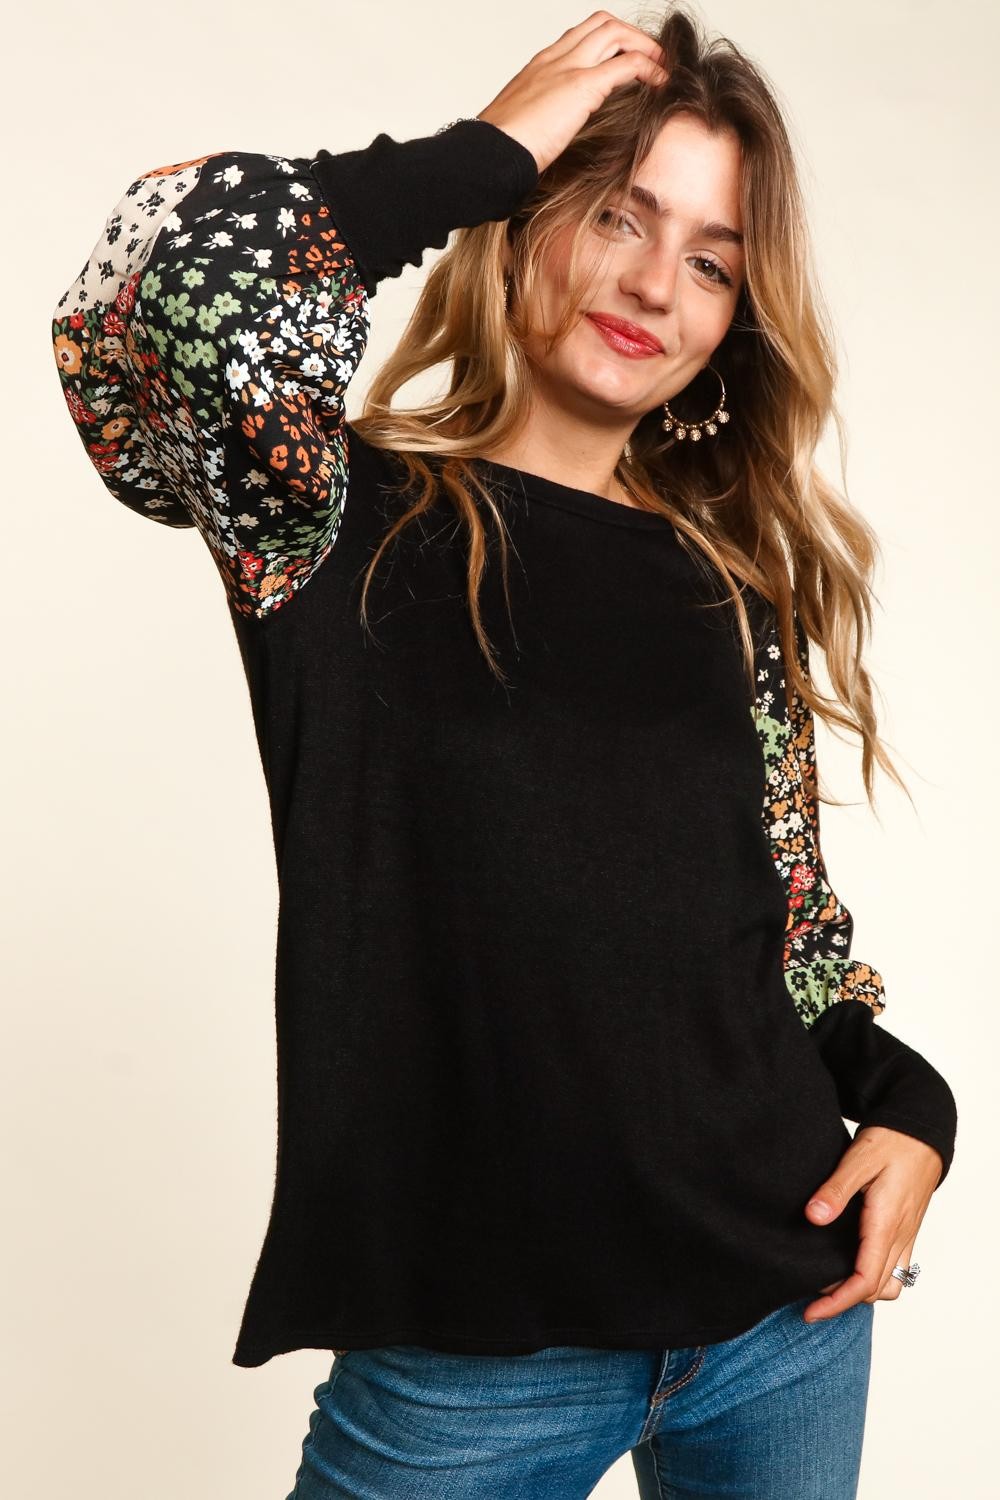 CURVY FLORAL ANIMAL PATCHWORK LONG SLEEVE SWEATER TOP FINAL SALE